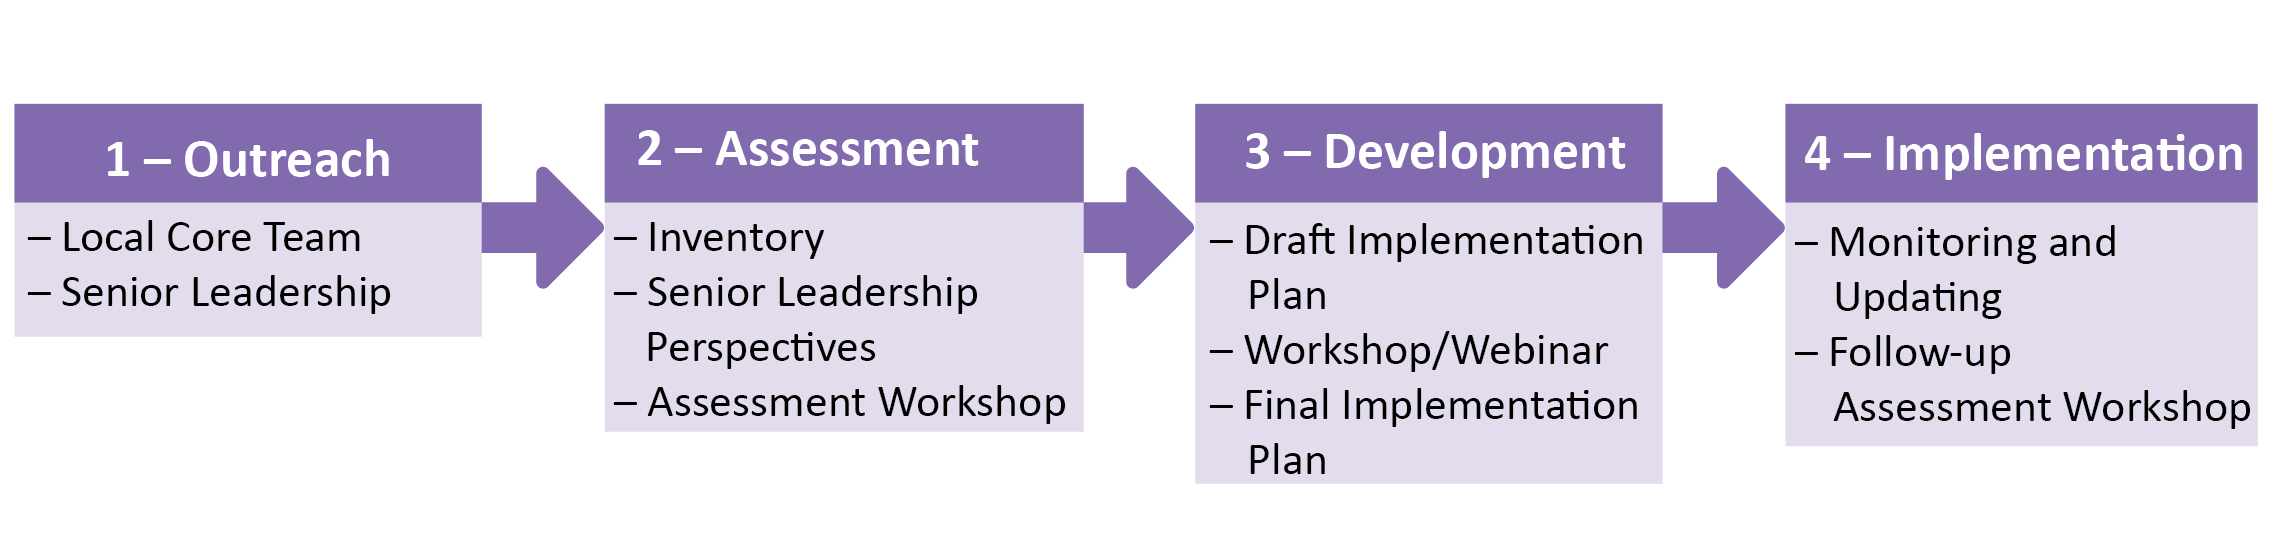 Figure 1. The process and activities associated with this 2-3 year implementation assistance.